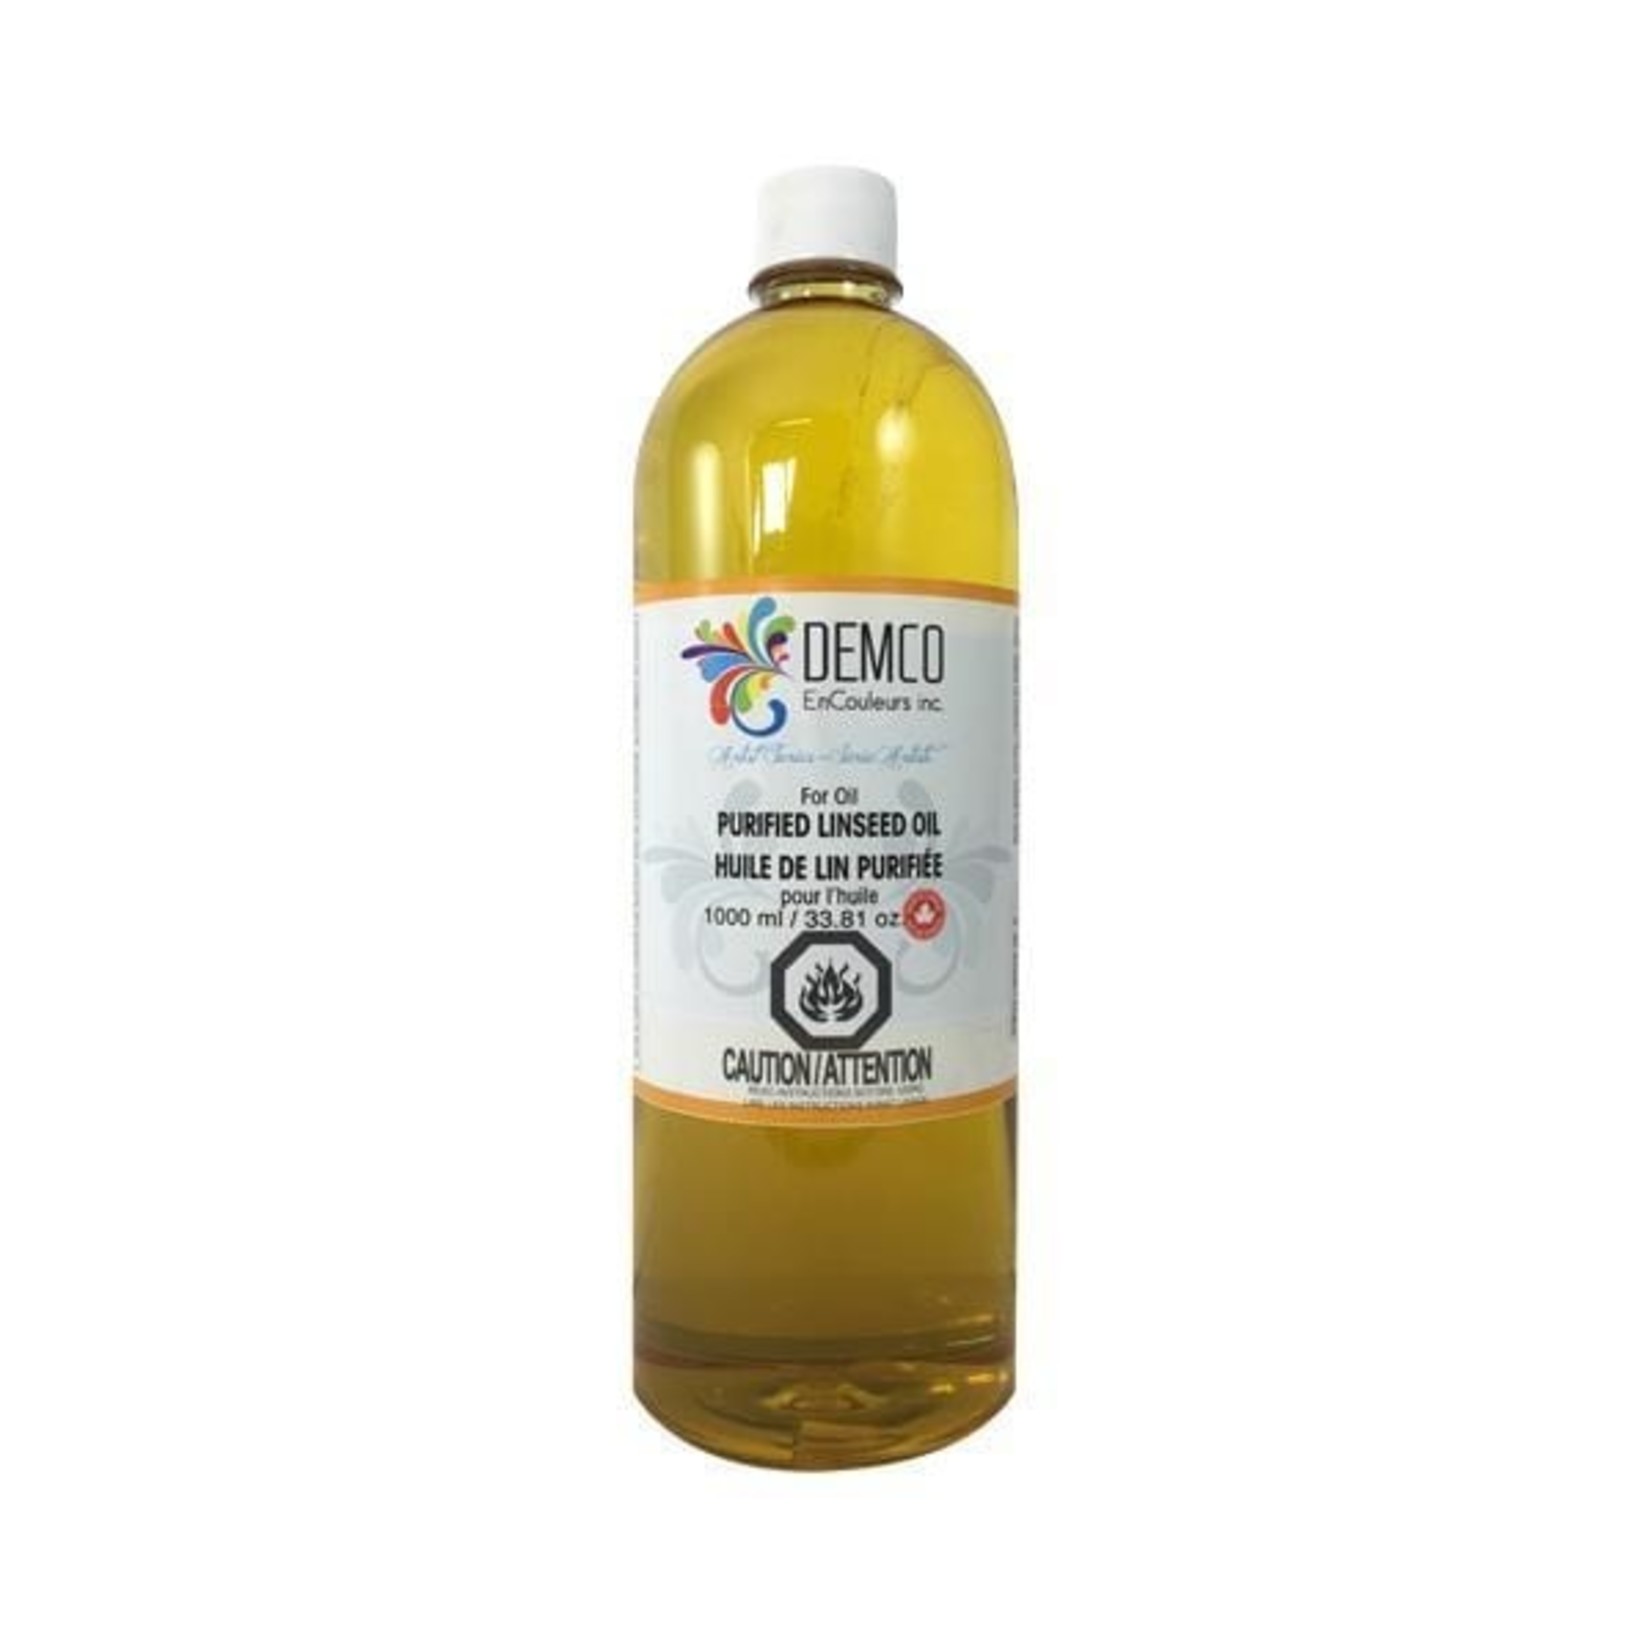 DEMCO PURIFIED LINSEED OIL 1L/33.81OZ